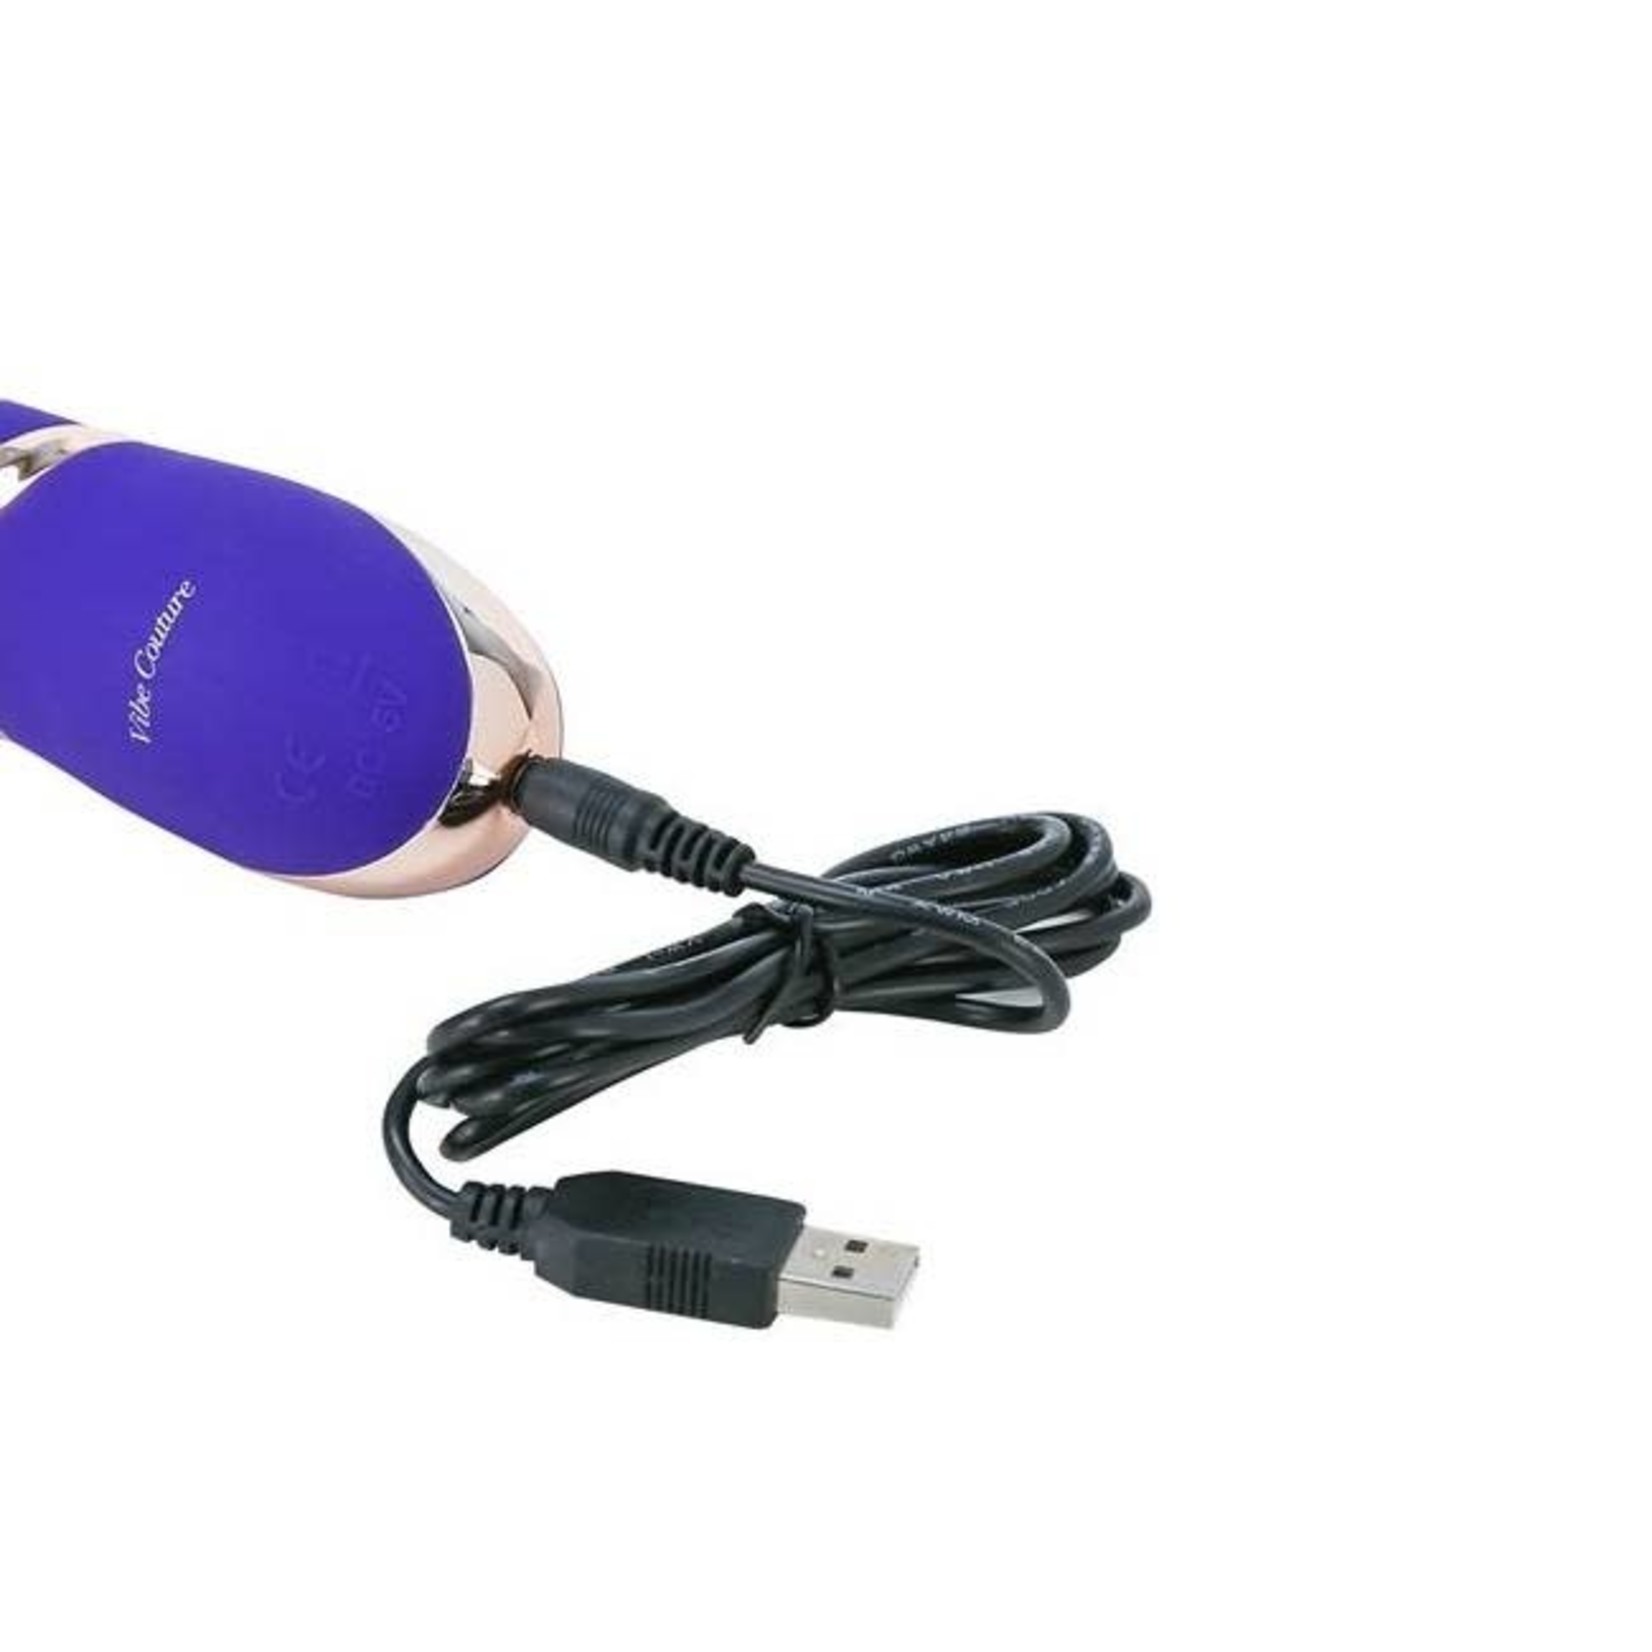 VIBE COUTURE FRONT ROW RECHARGEABLE VIBRATOR - PURPLE